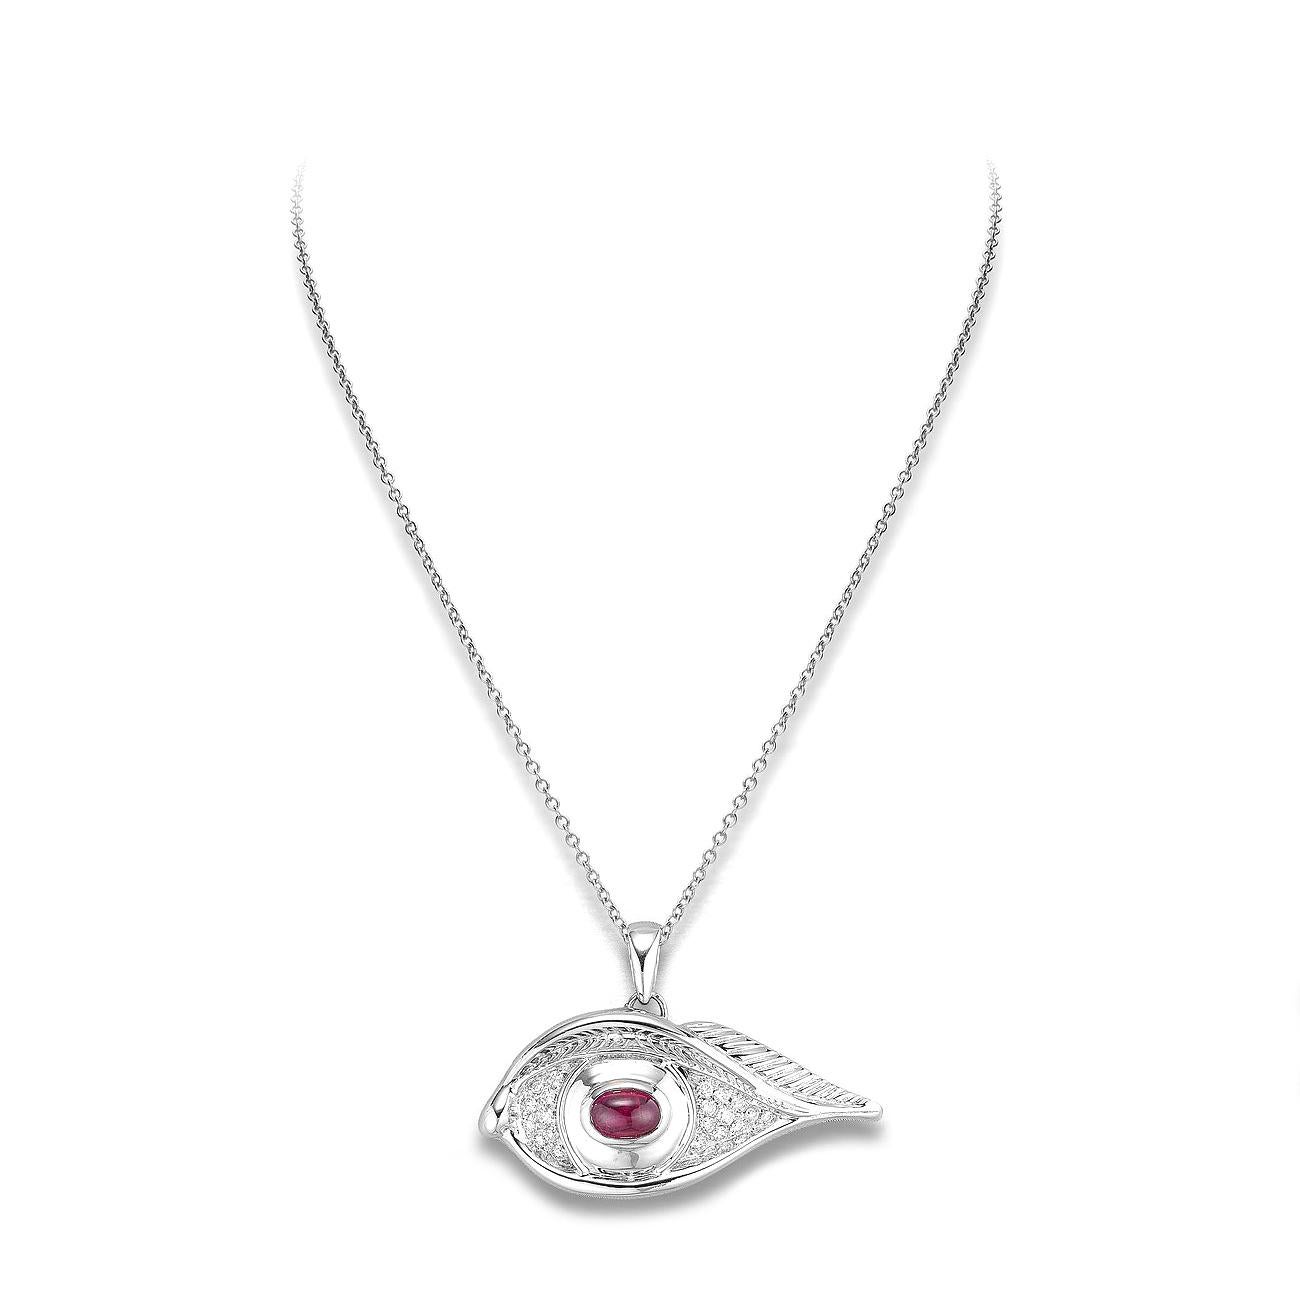 Cabochon Eye Pendant Necklace with Ruby For Sale